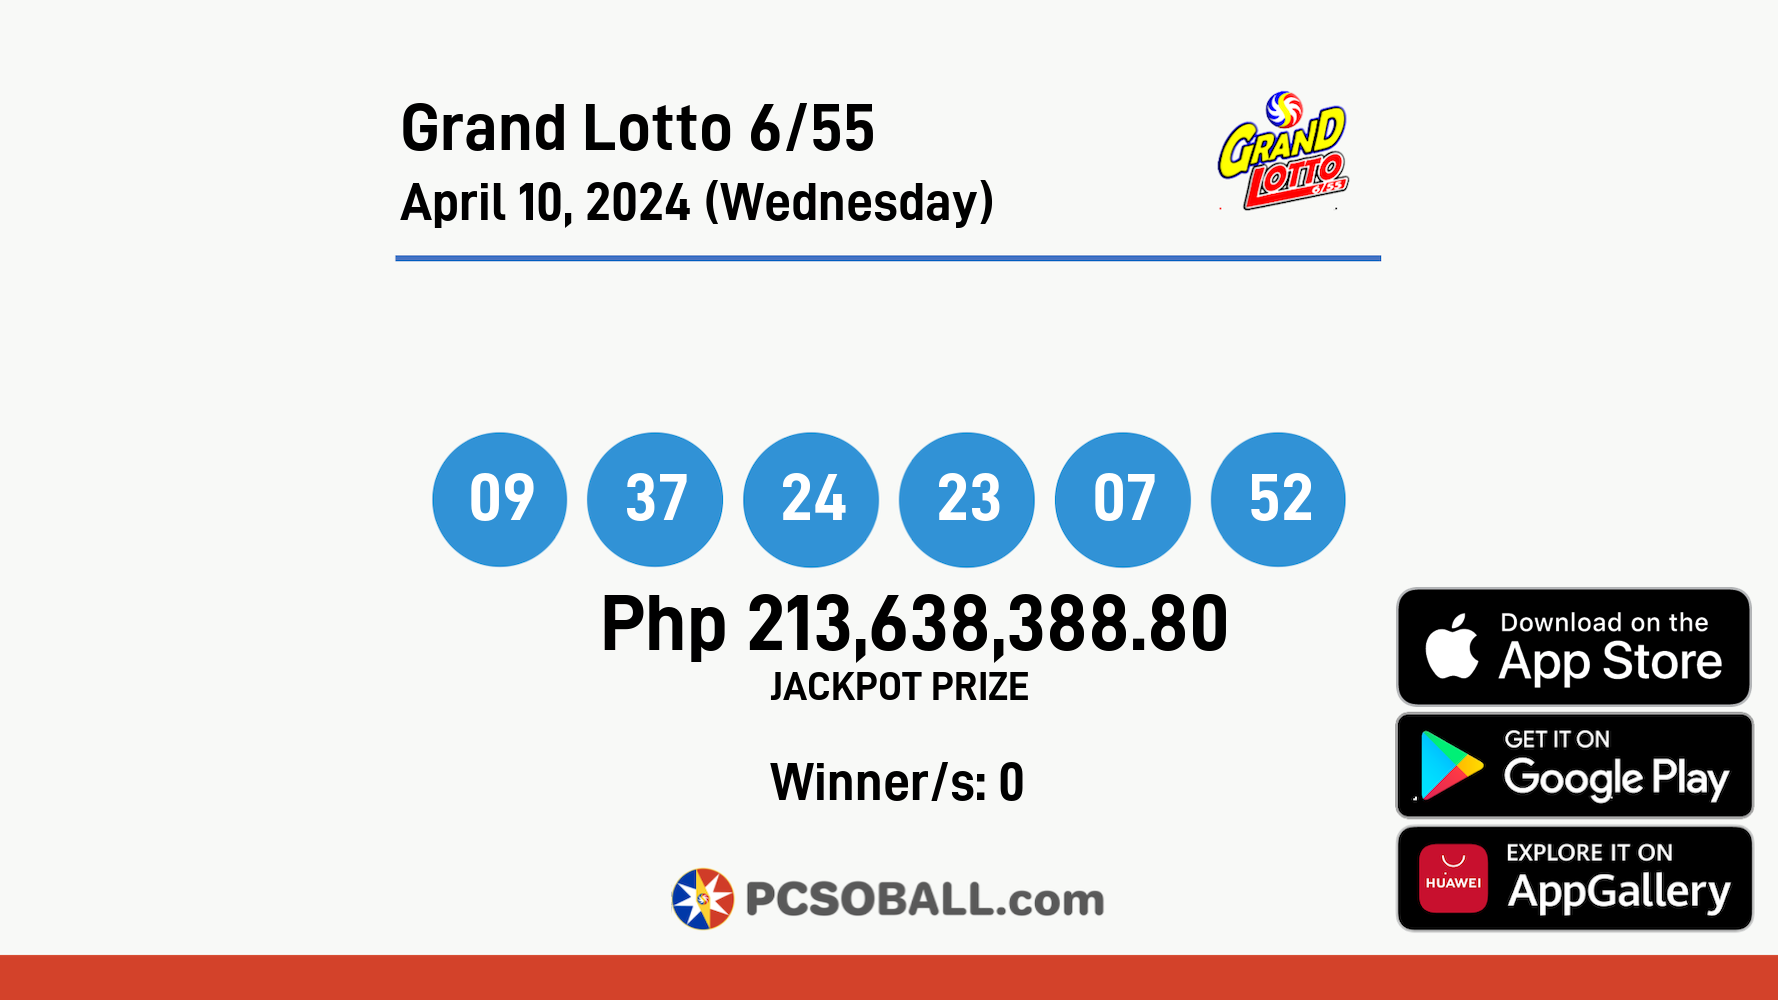 Grand Lotto 6/55 April 10, 2024 (Wednesday) Result